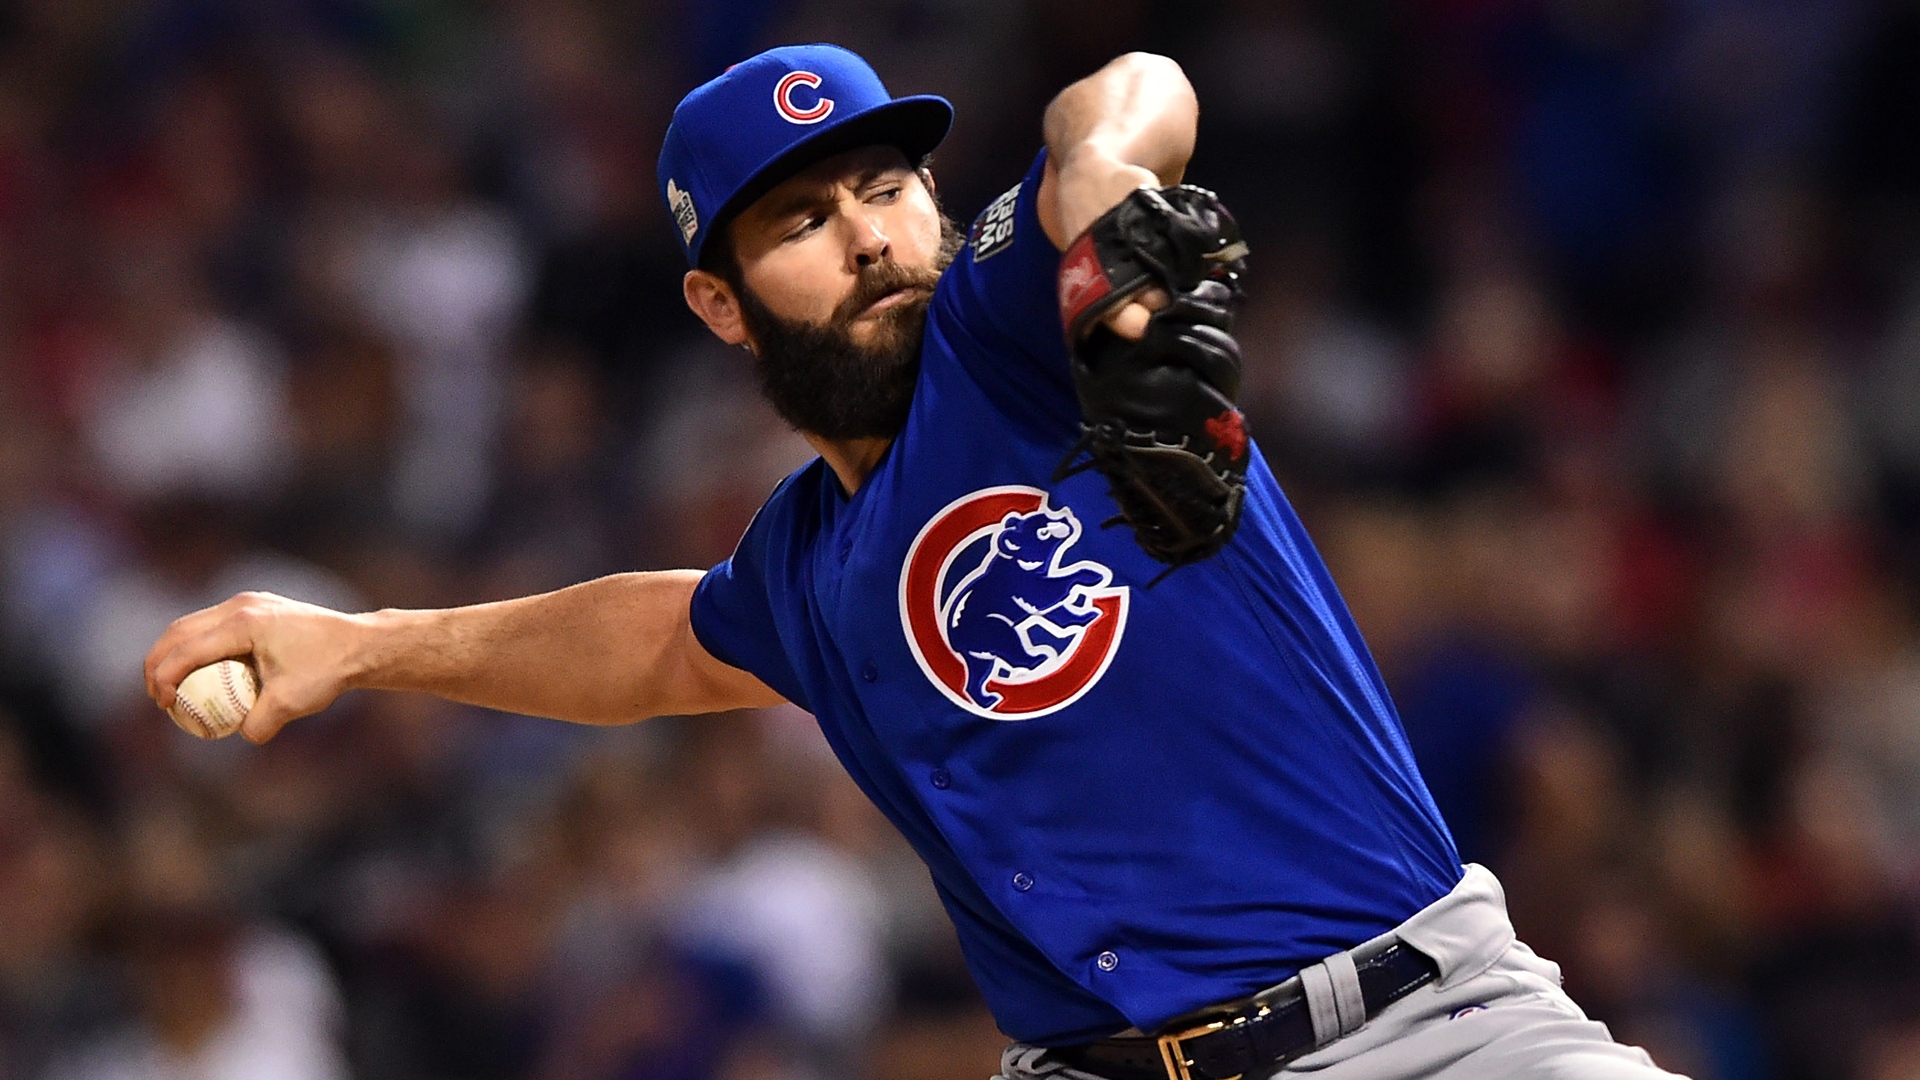 Cubs rotation projection after Jake Arrieta, additions by Trevor Williams